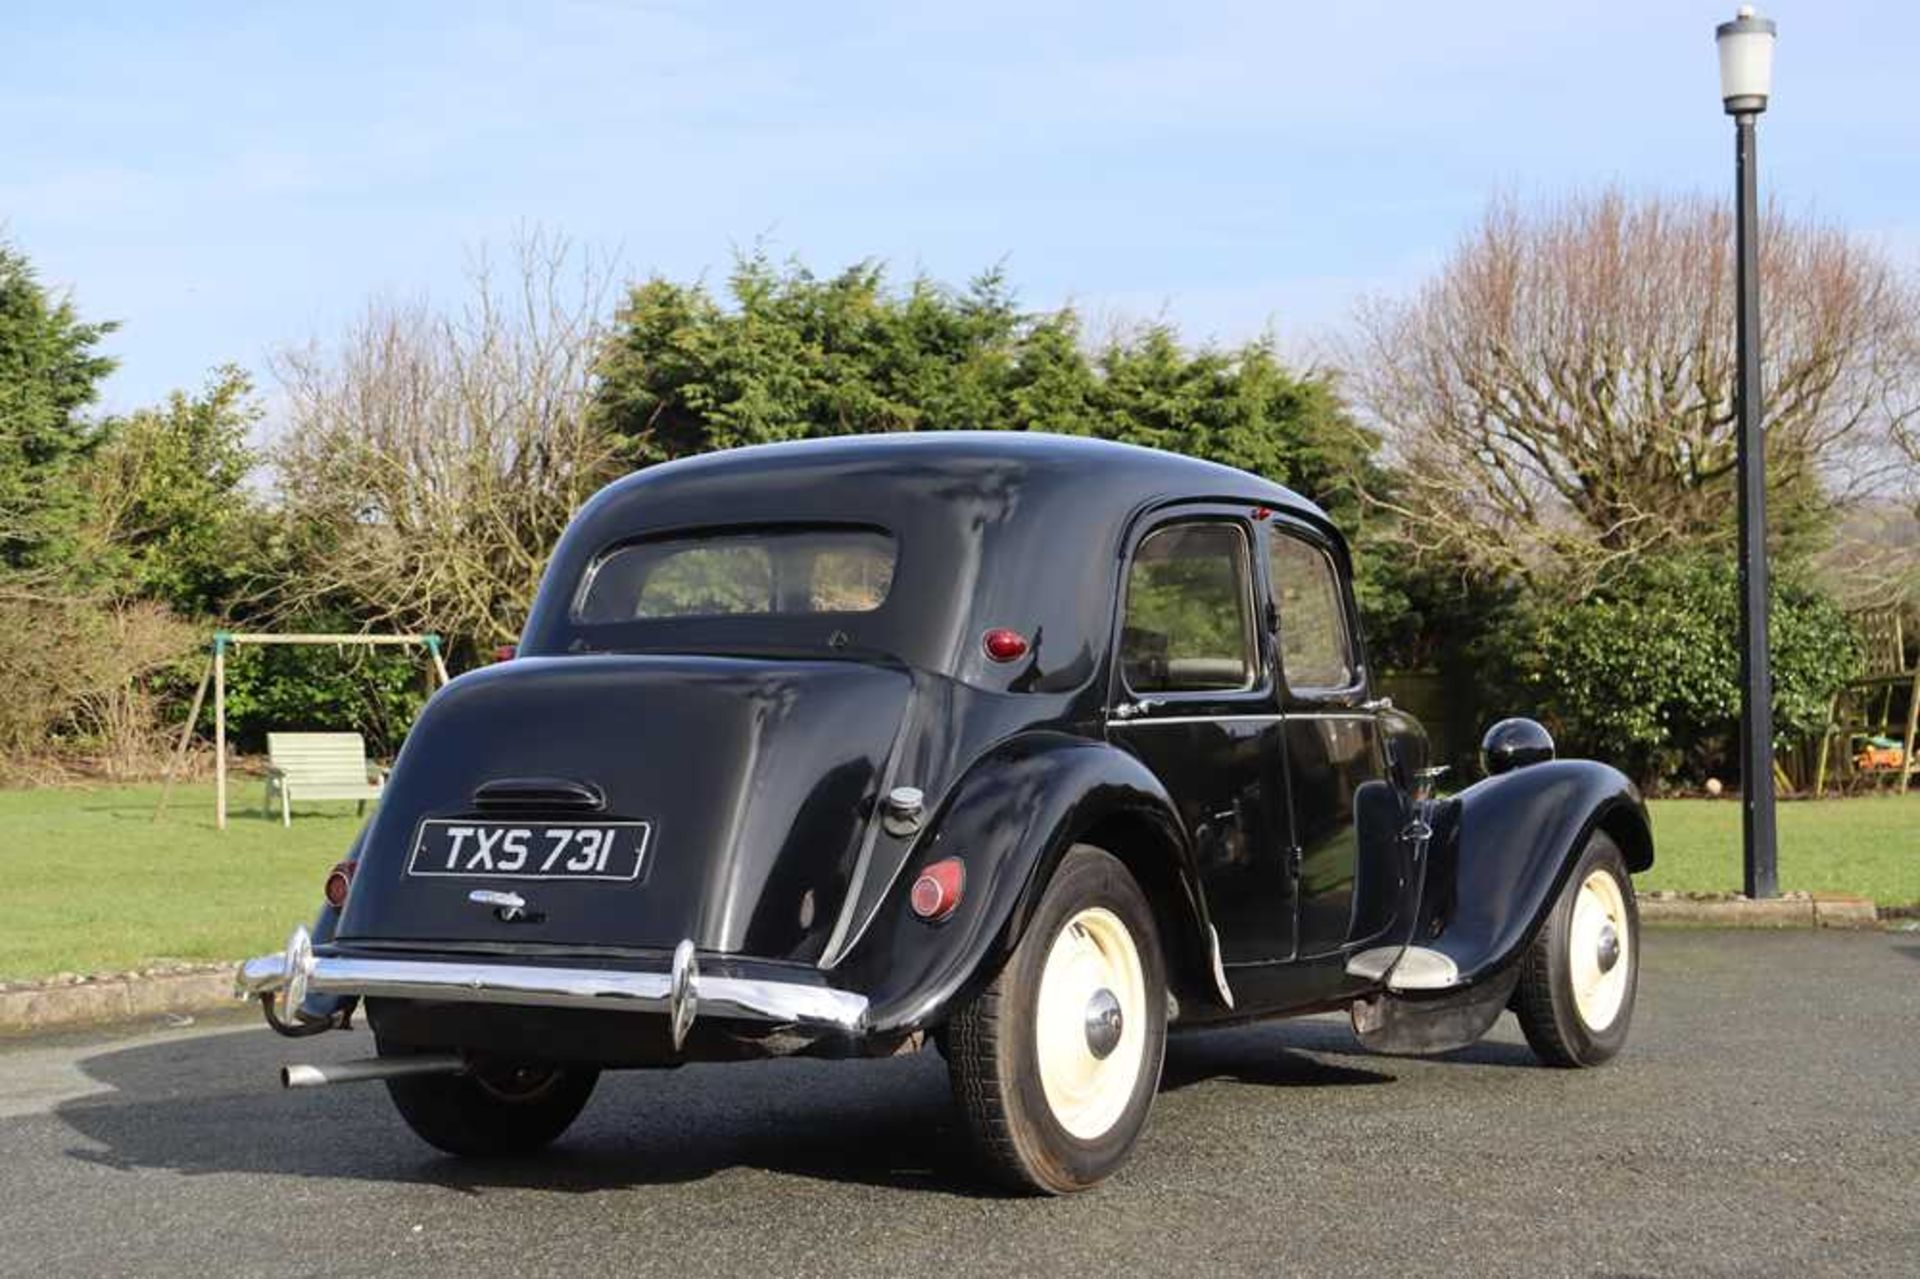 1952 Citroën 11BL Traction Avant In current ownership for over 40 years - Image 16 of 60